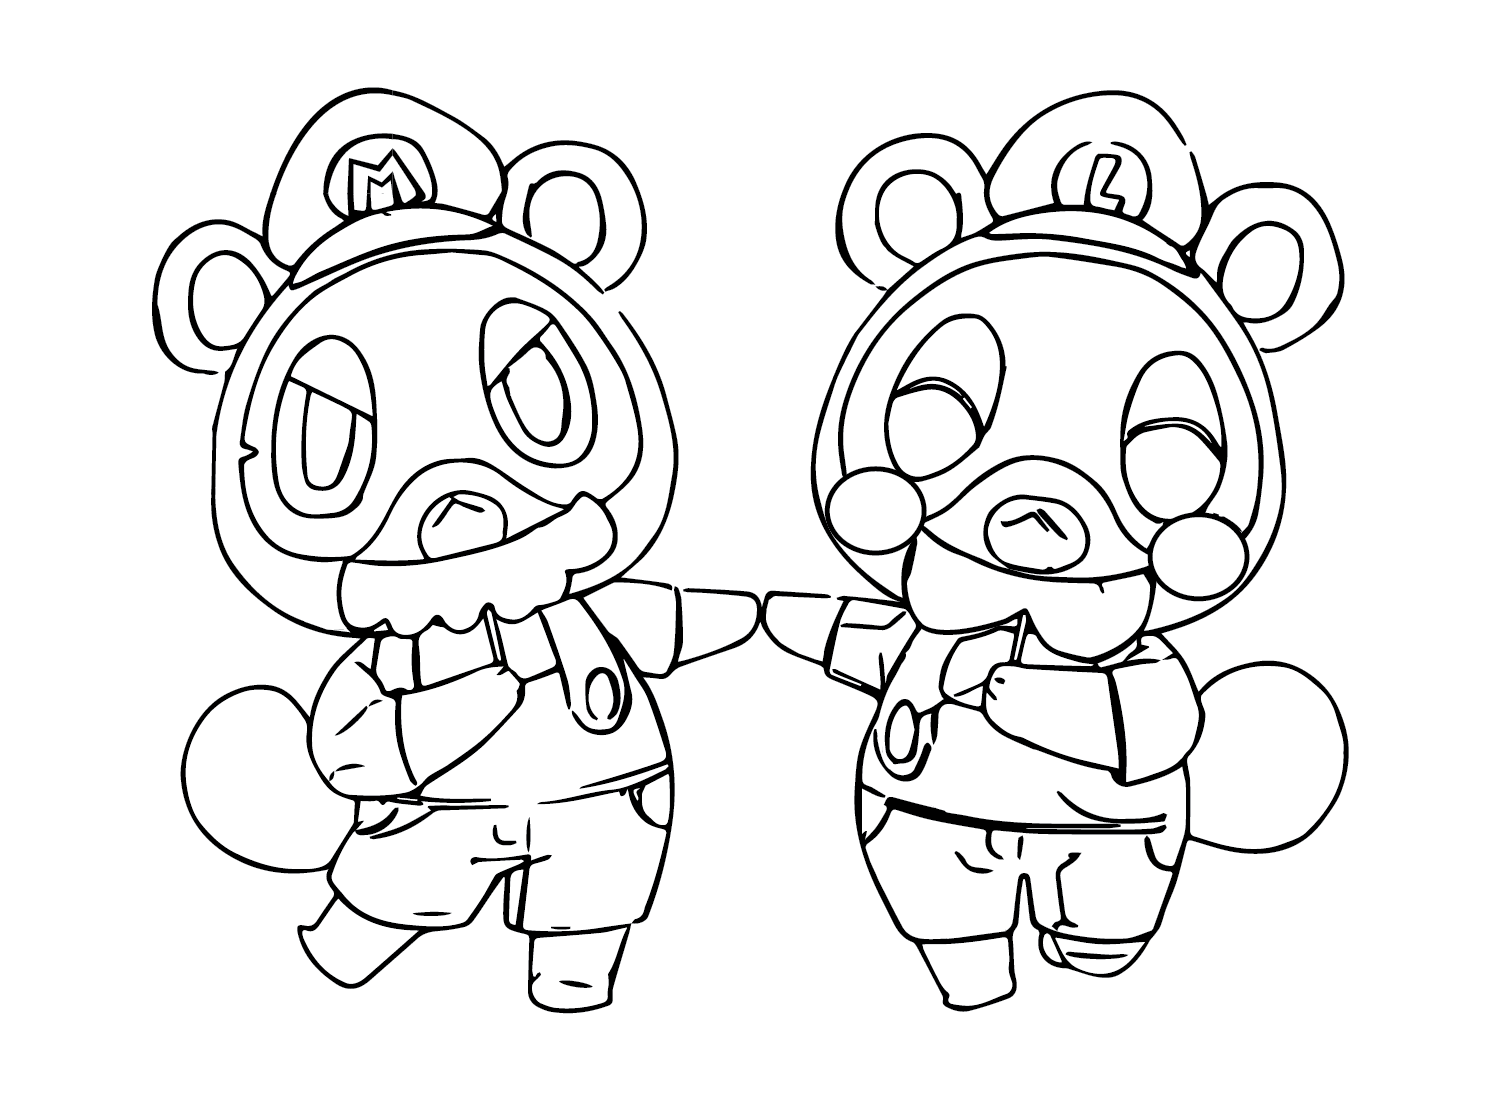 Timmy & Tommy from Animal Crossing